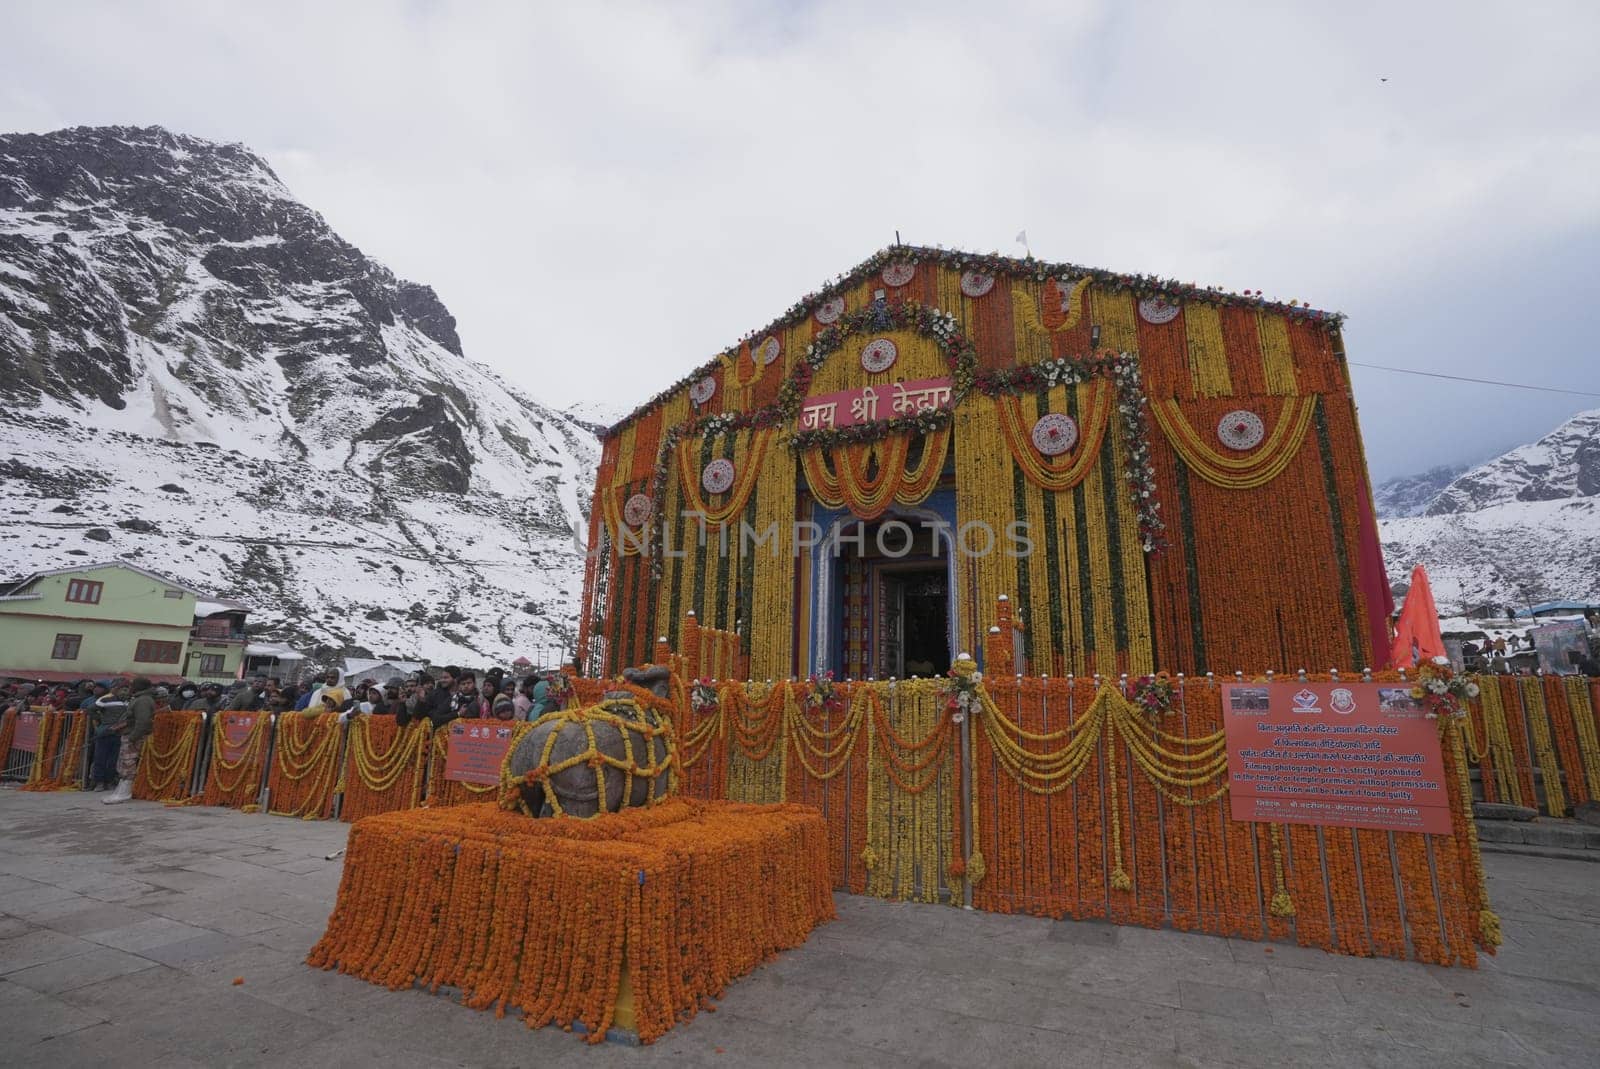 An offering of a beautiful flower garland graces Kedarnath Temple, weaving nature's elegance into sacred worship.4k footage